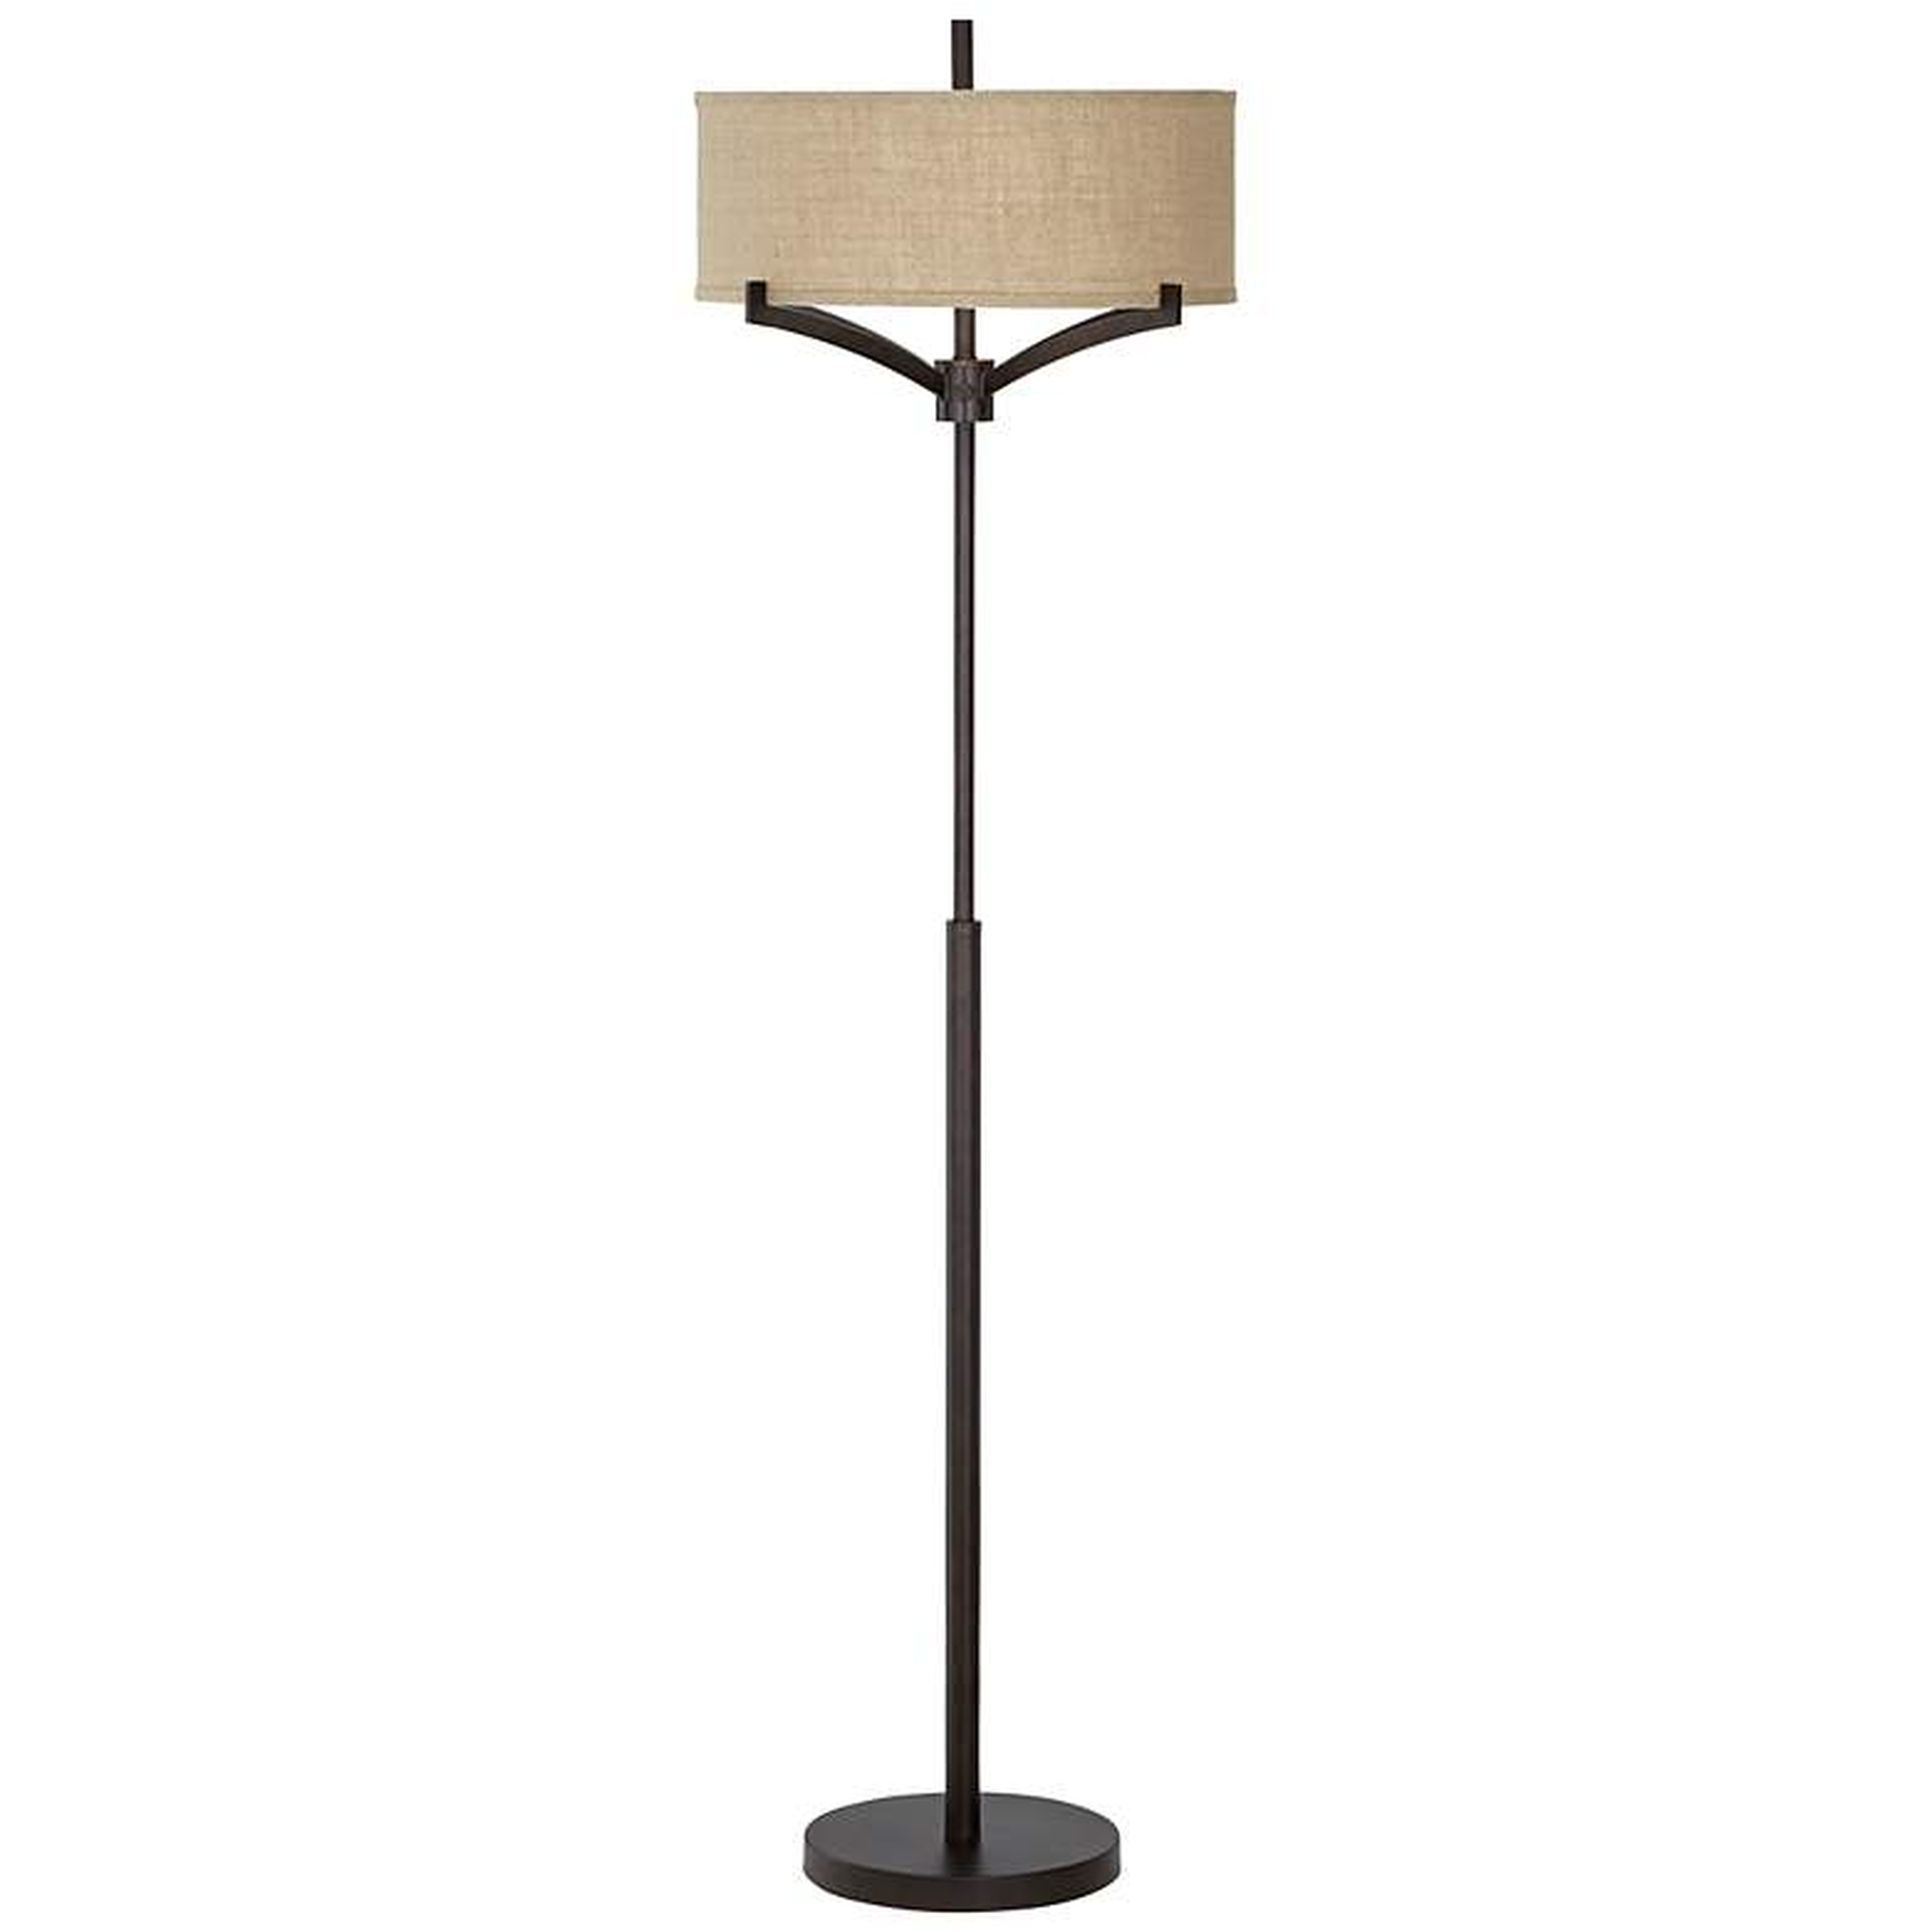 Franklin Iron Works™ Tremont Floor Lamp with Burlap Shade - Lamps Plus